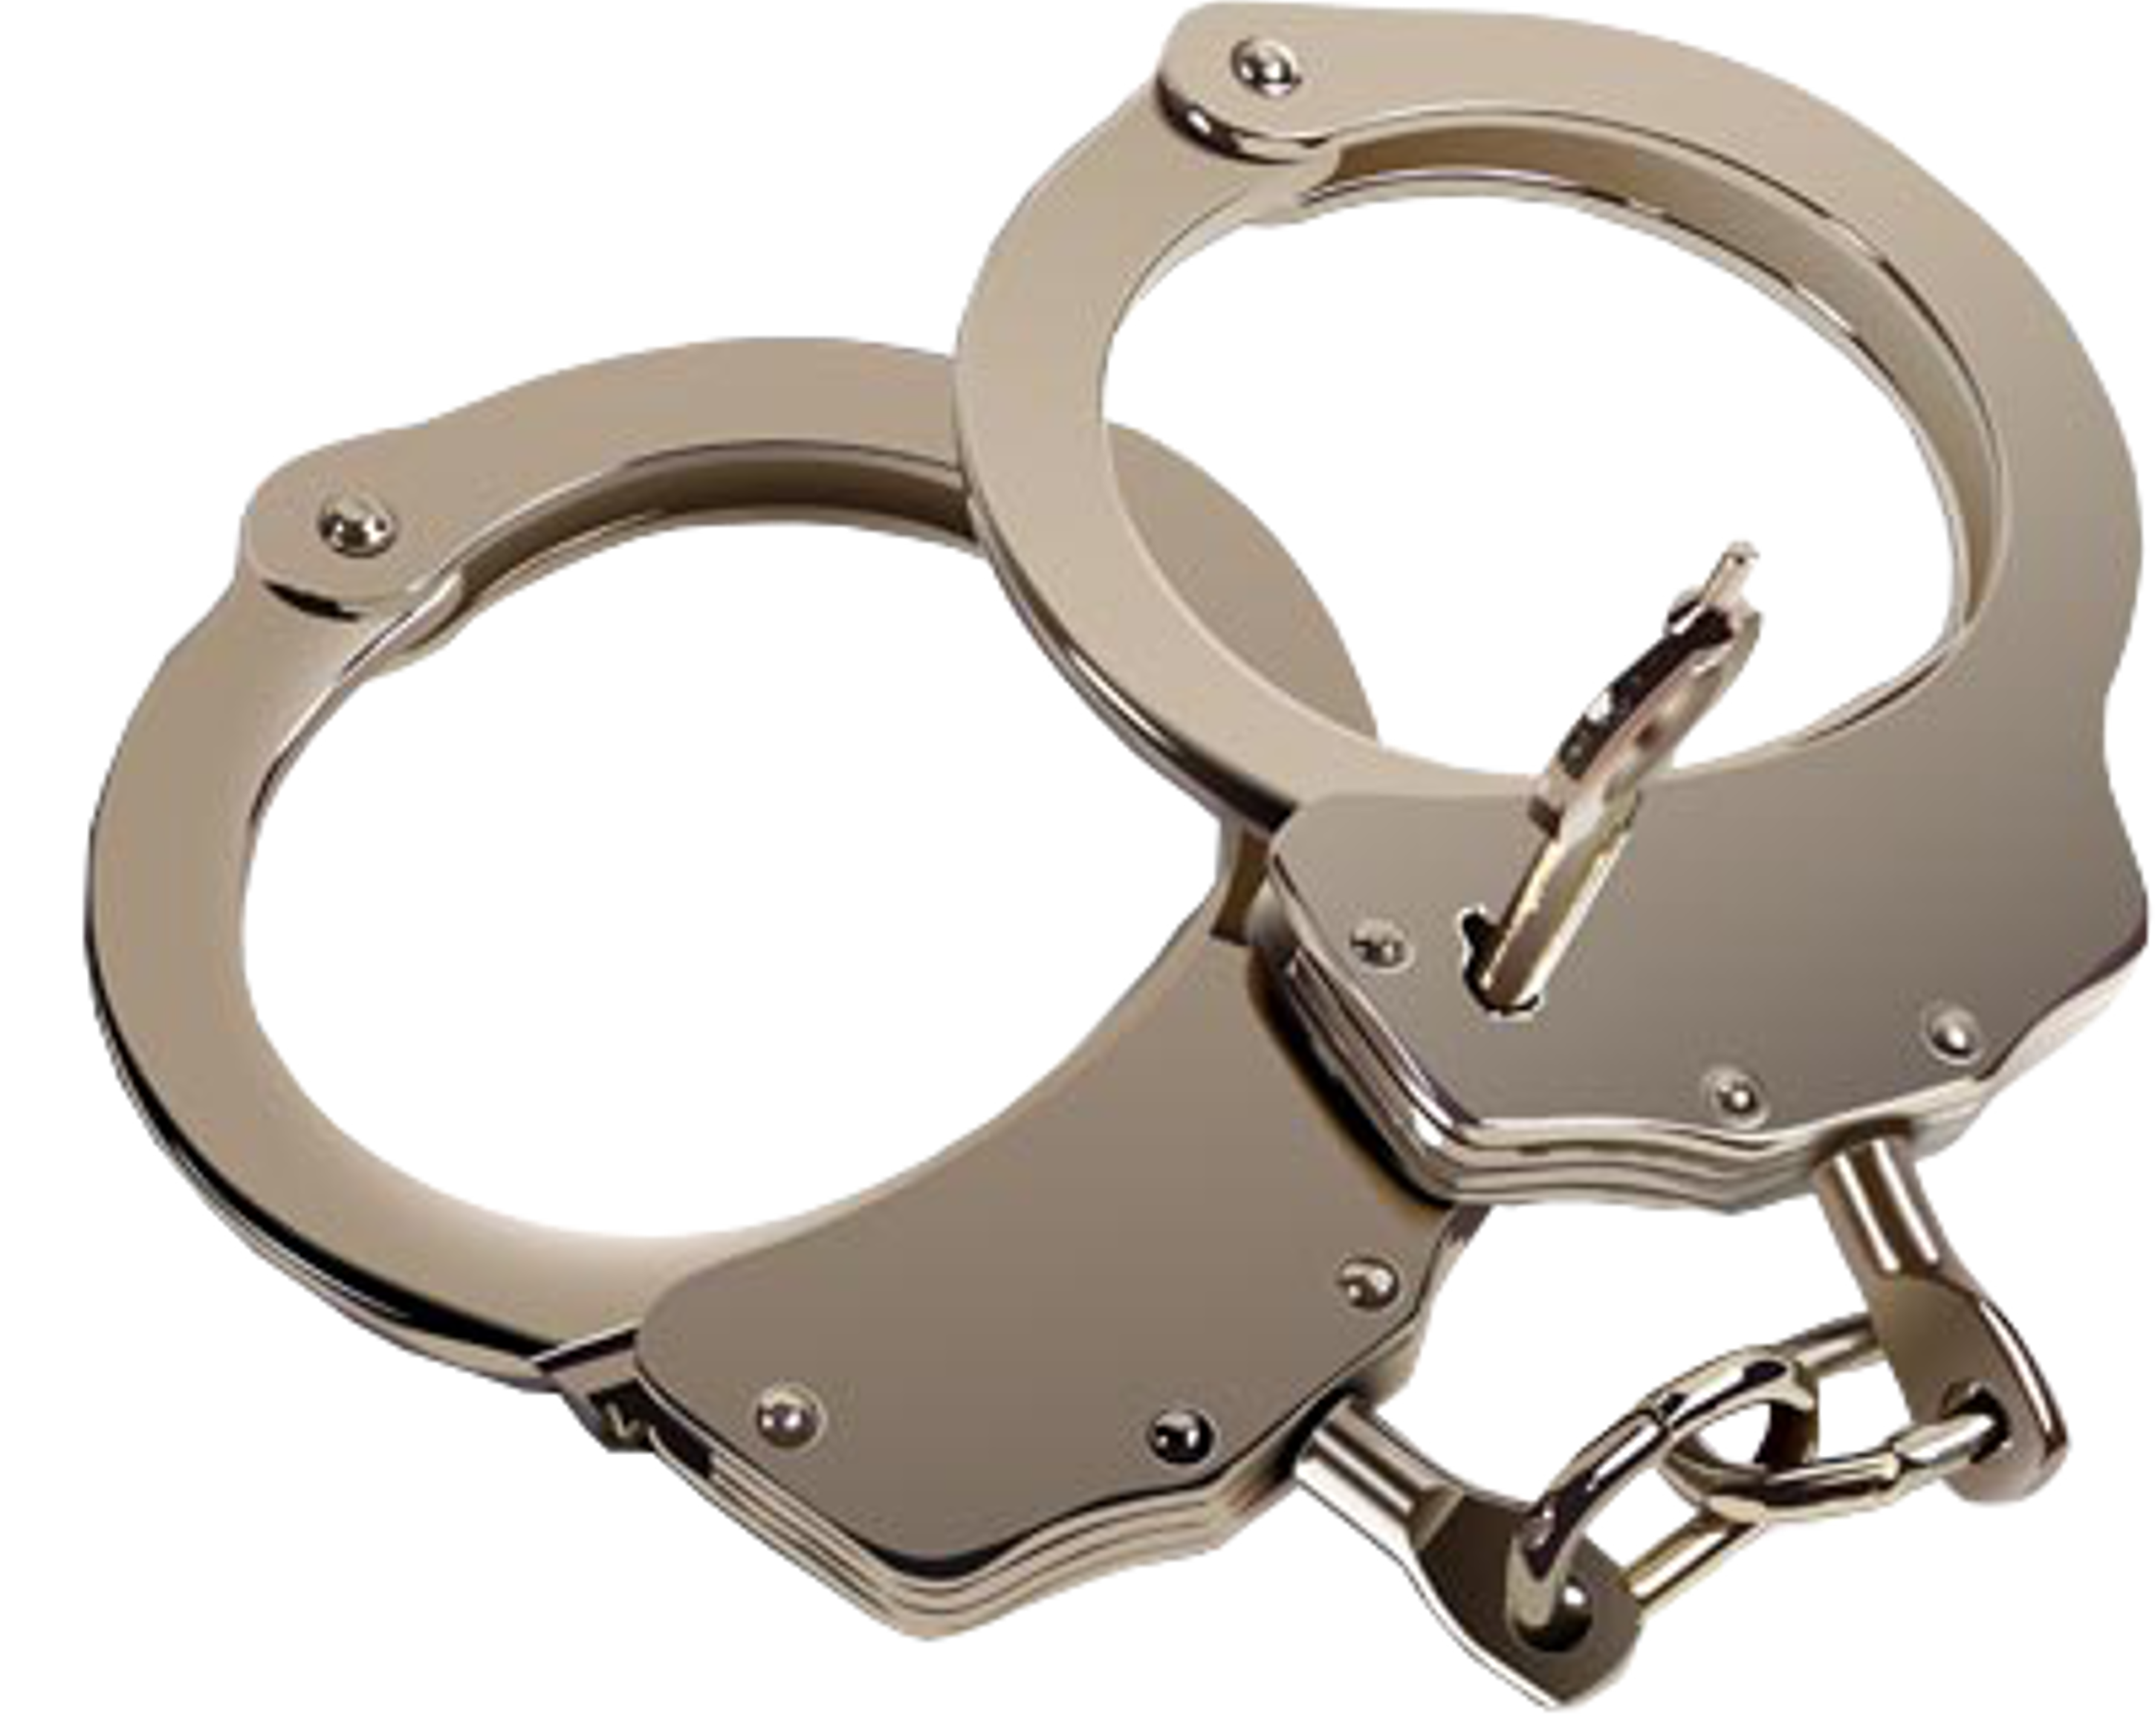 Handcuff clipart pink. Handcuffs png images free